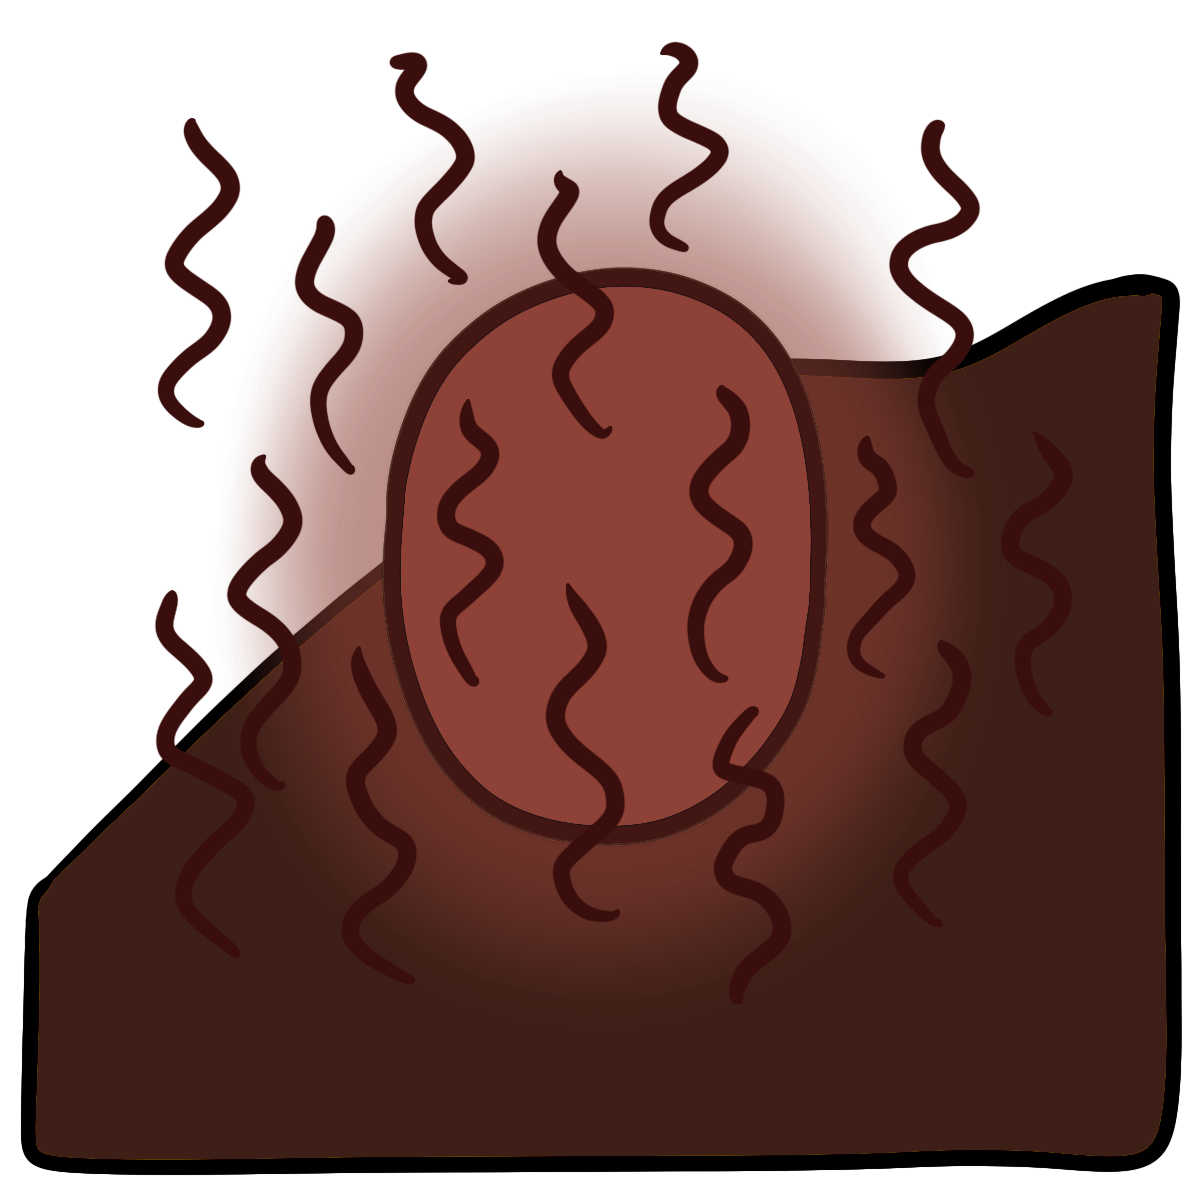 A red glowing oval with vertical squiggly dark red lines around it. Curved dark brown fills the bottom half of the background.